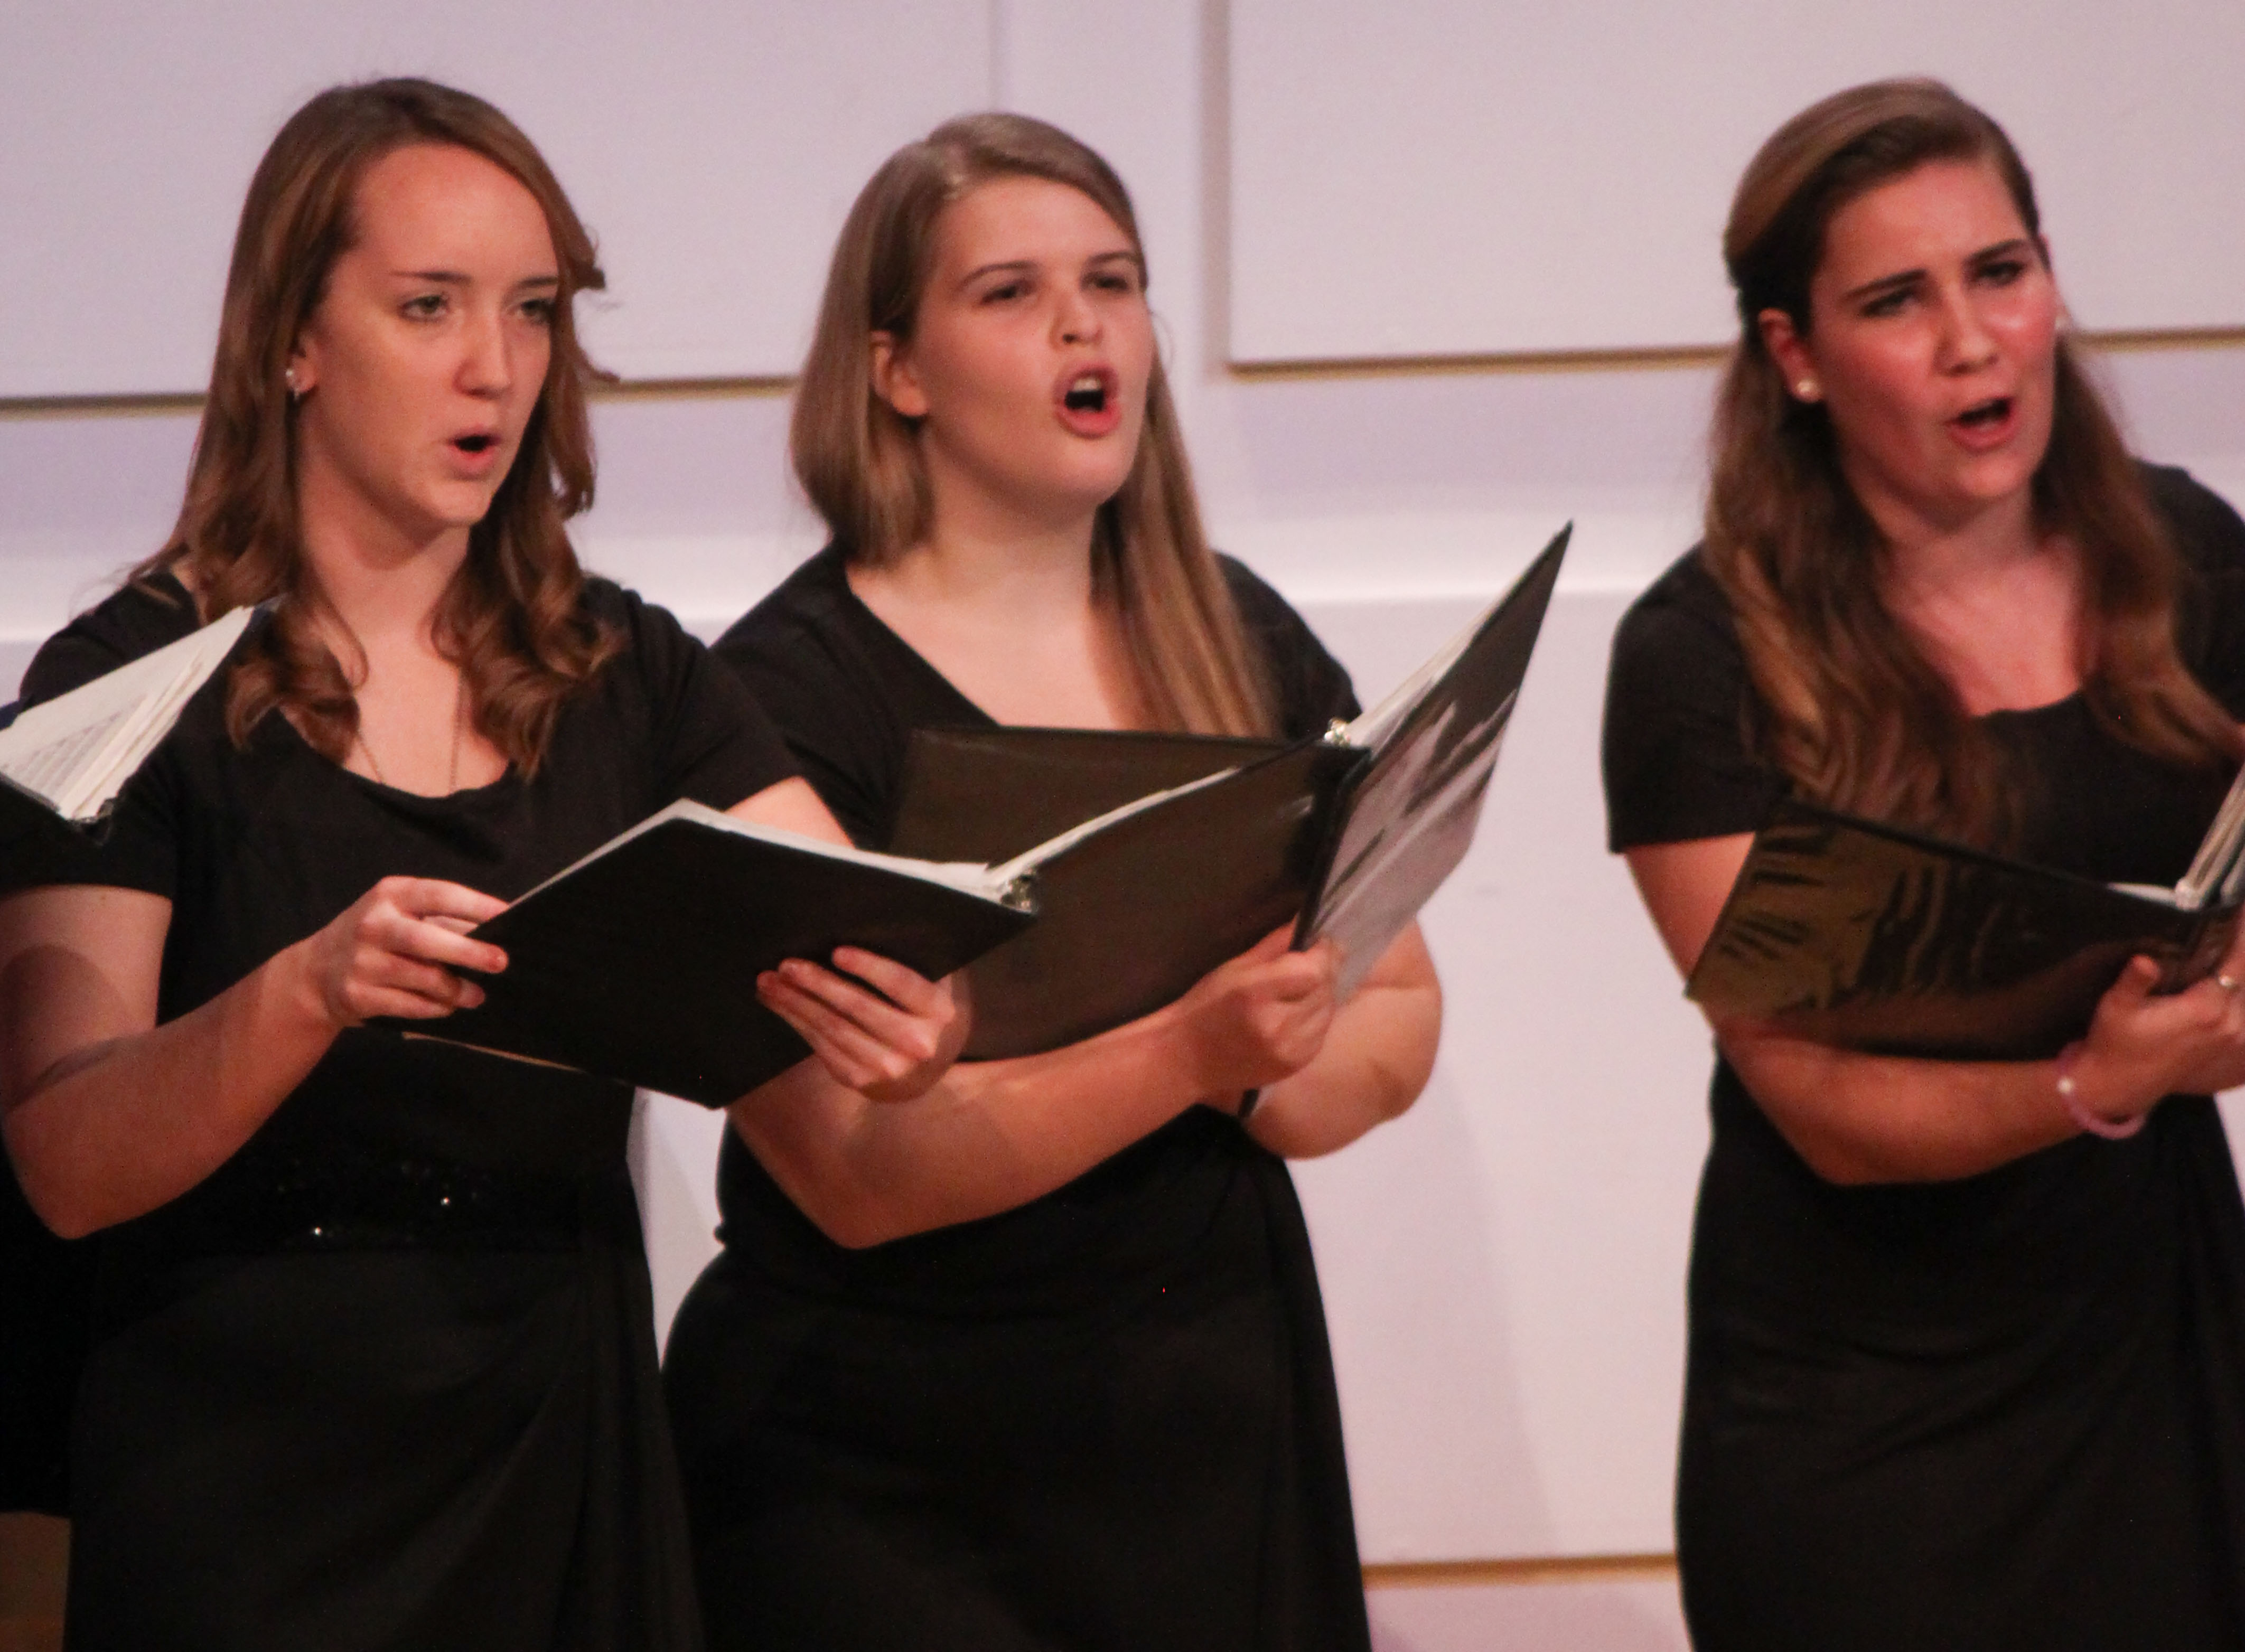 Local high school students perform choral works.